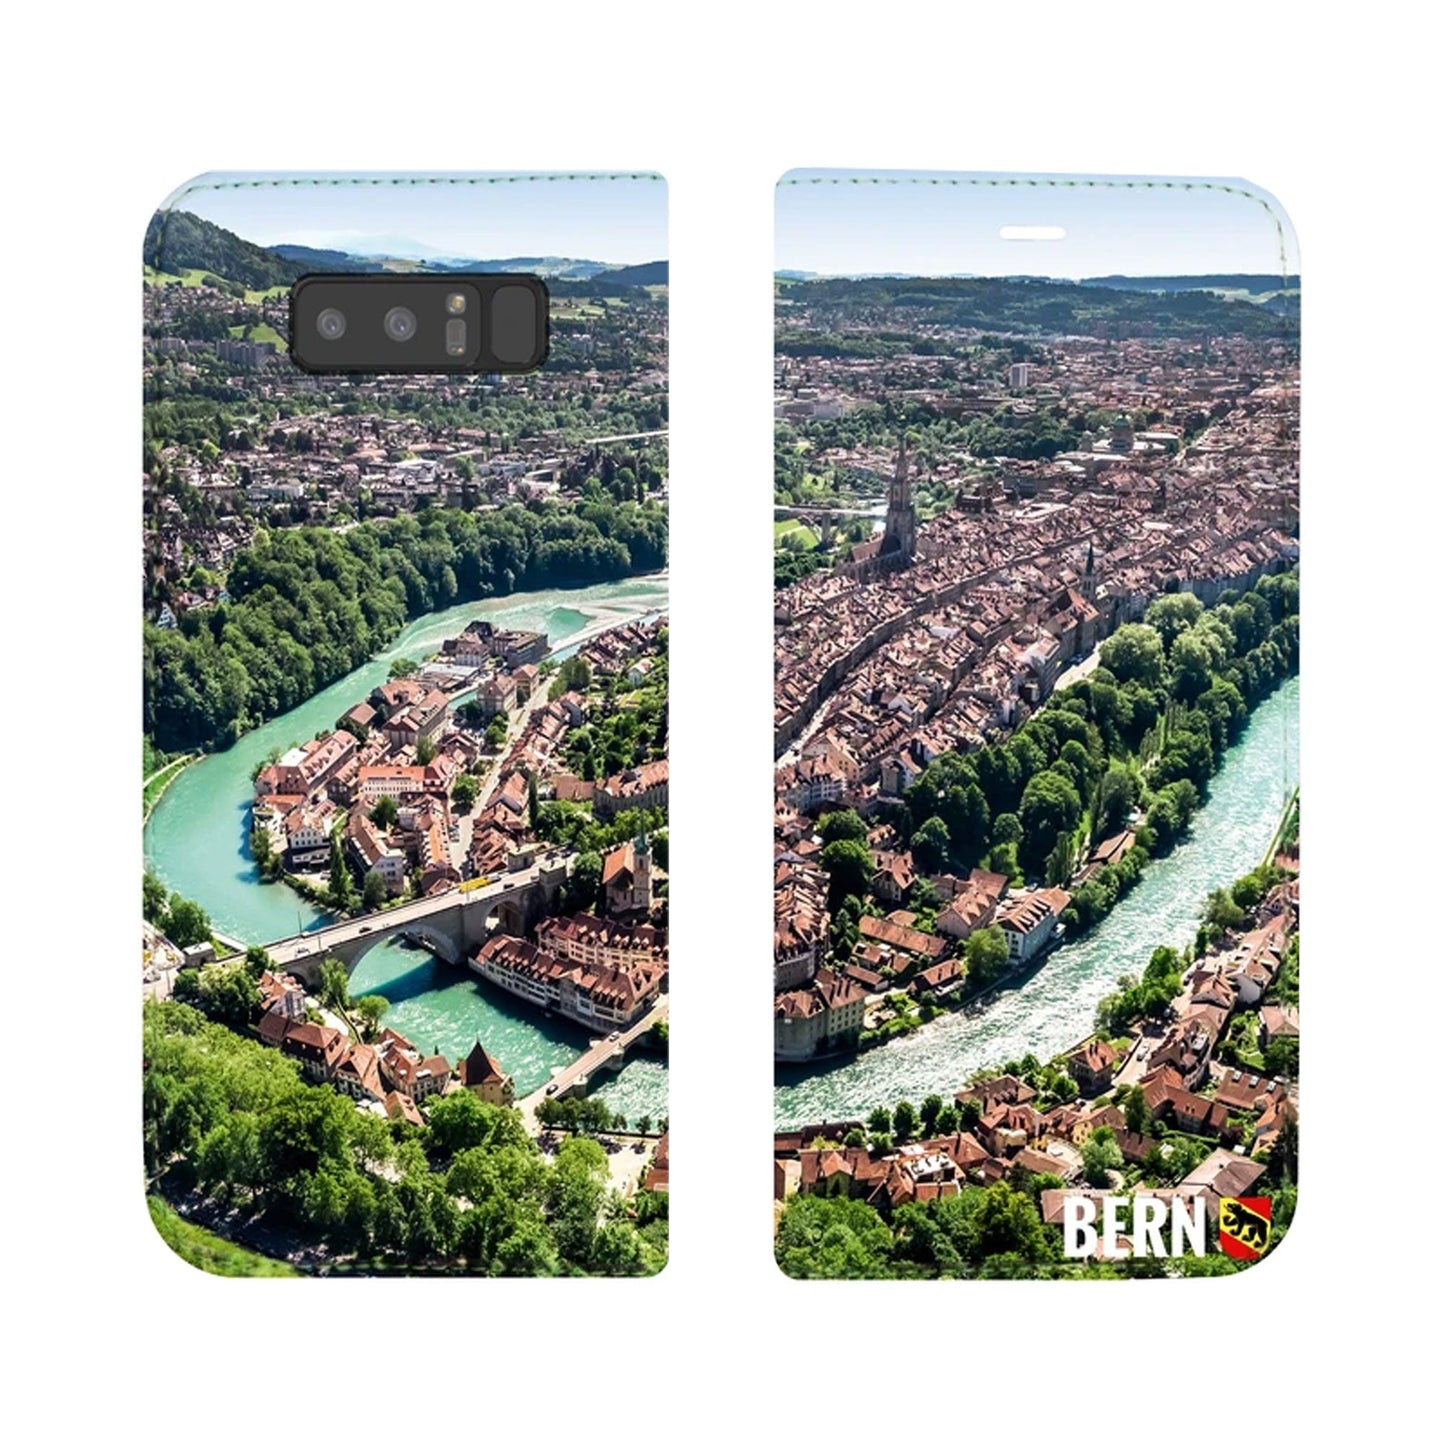 Bern City Panorama Case for iPhone and Samsung